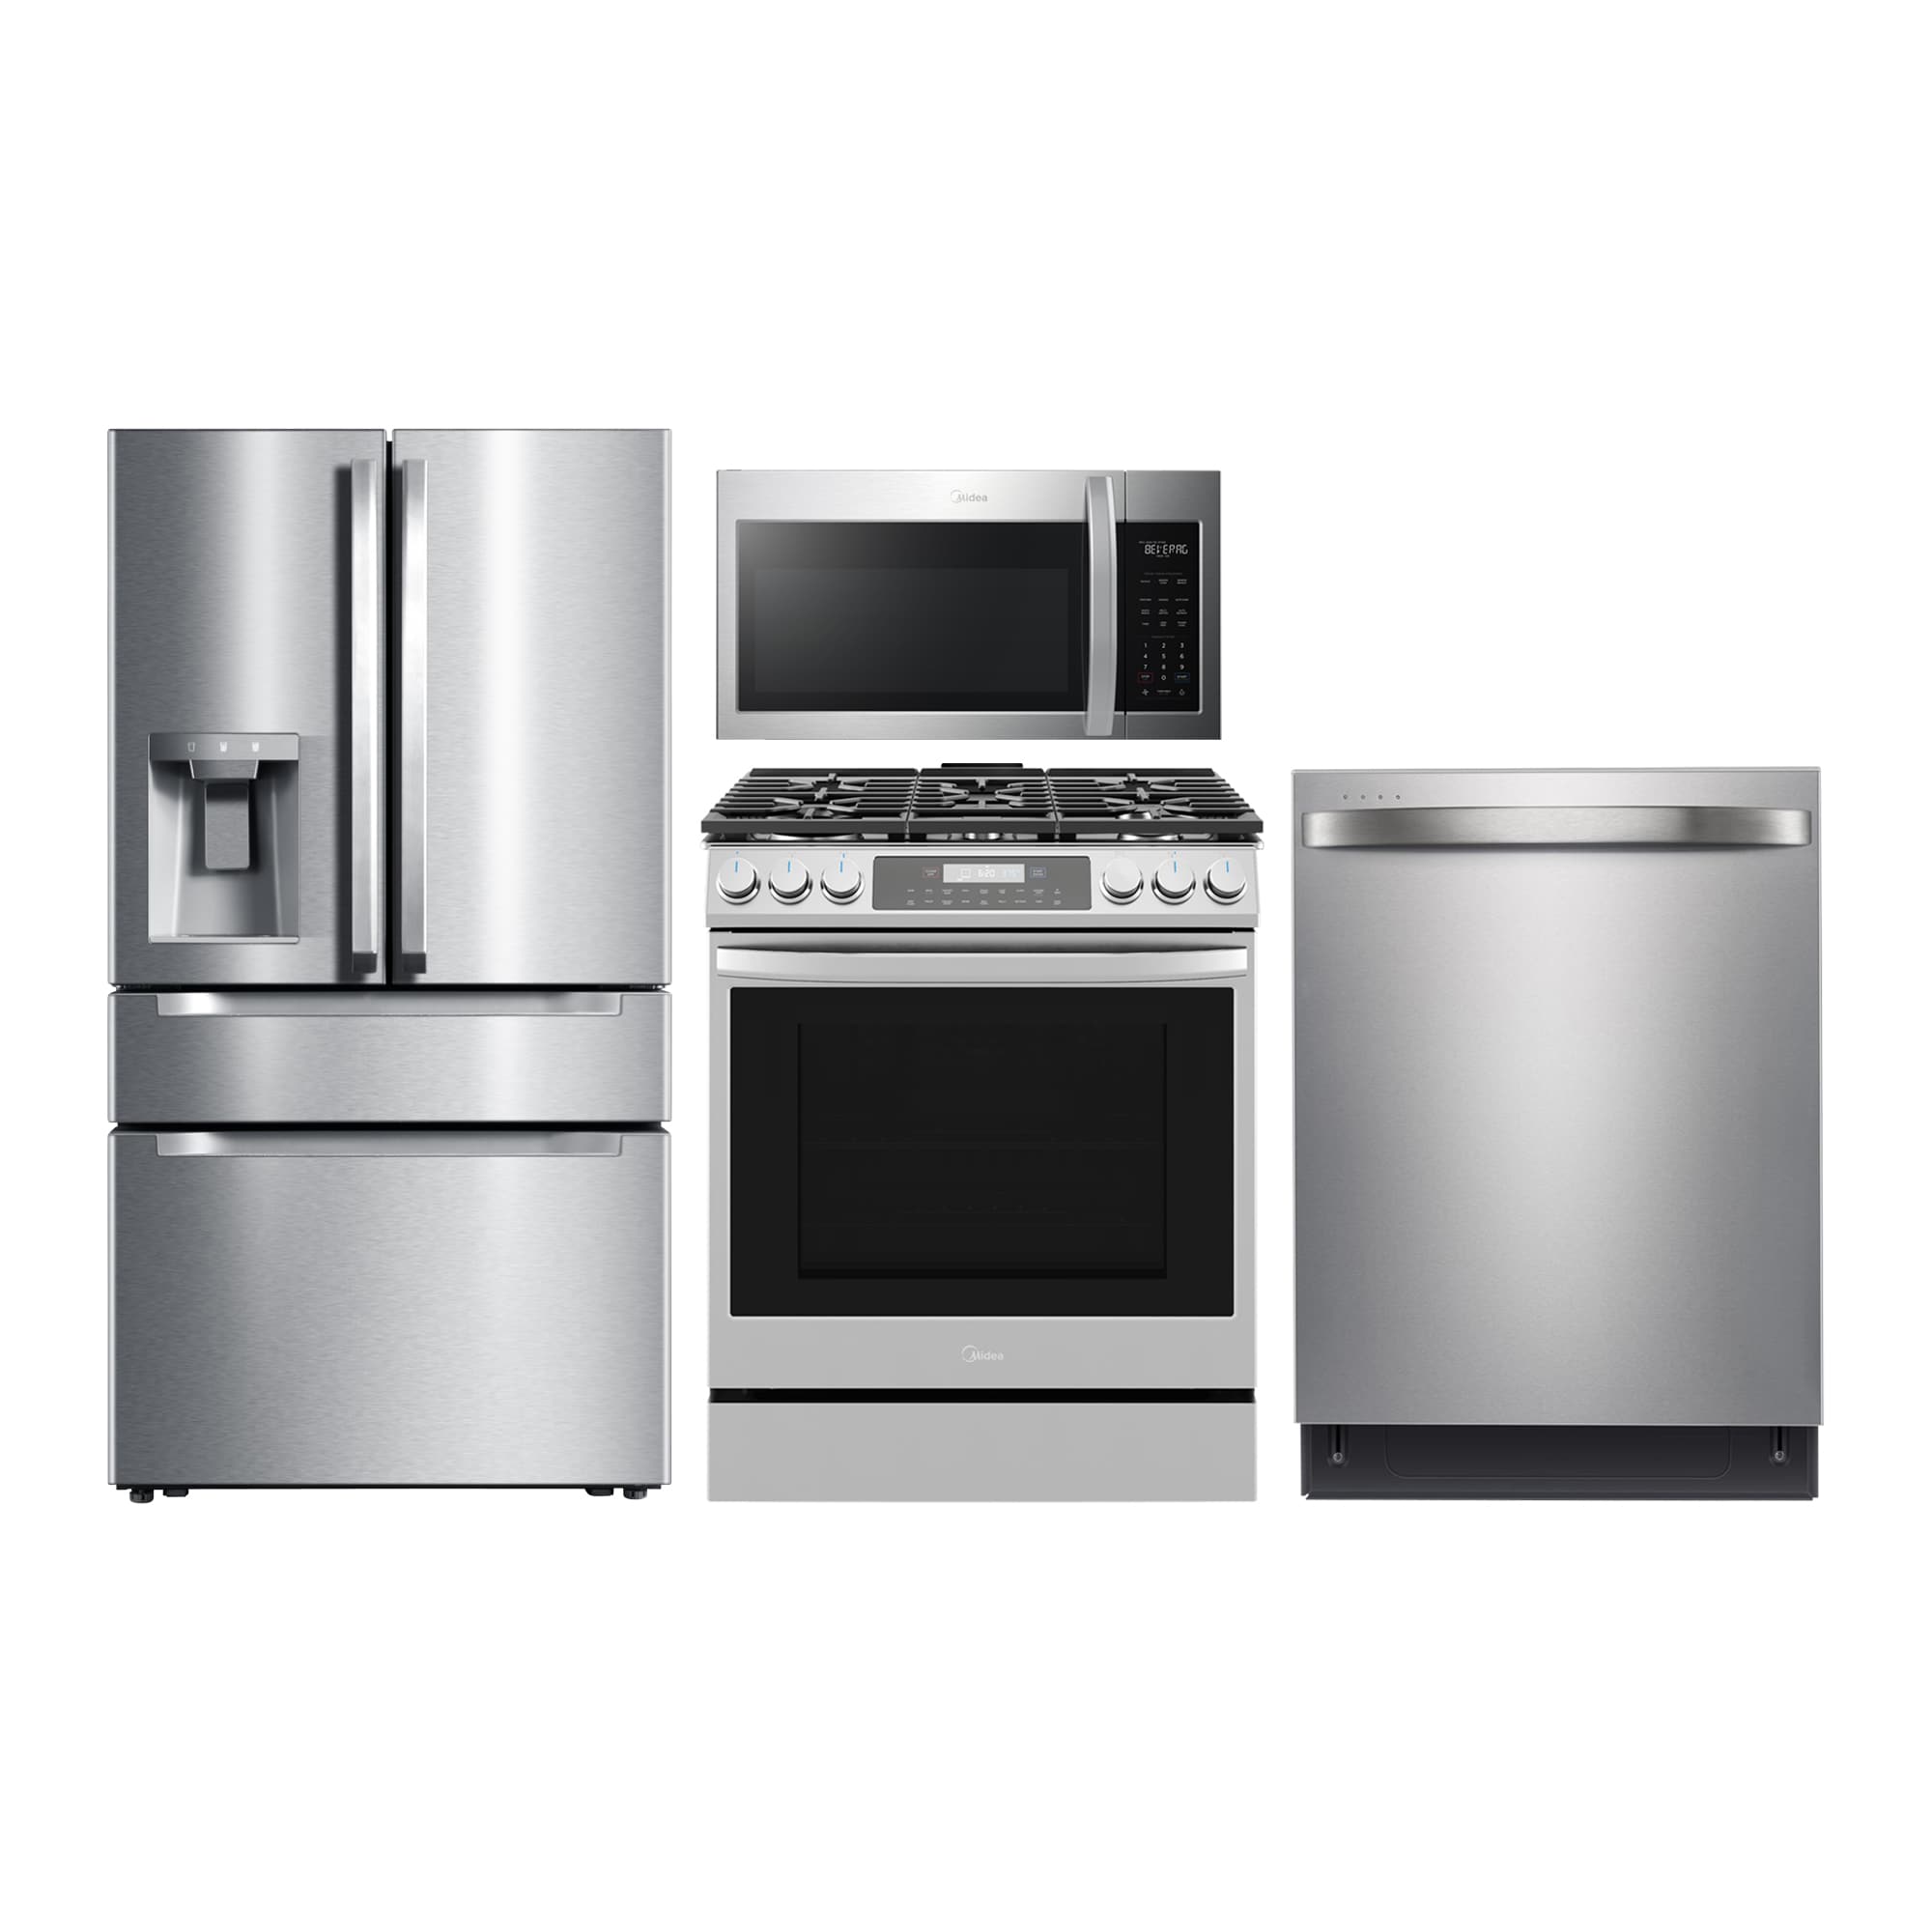 Midea 30 In. Slide-In Electric Range 6.3 cu. ft. Self-Cleaning Oven in  Stainless Steel, MES30S4AST